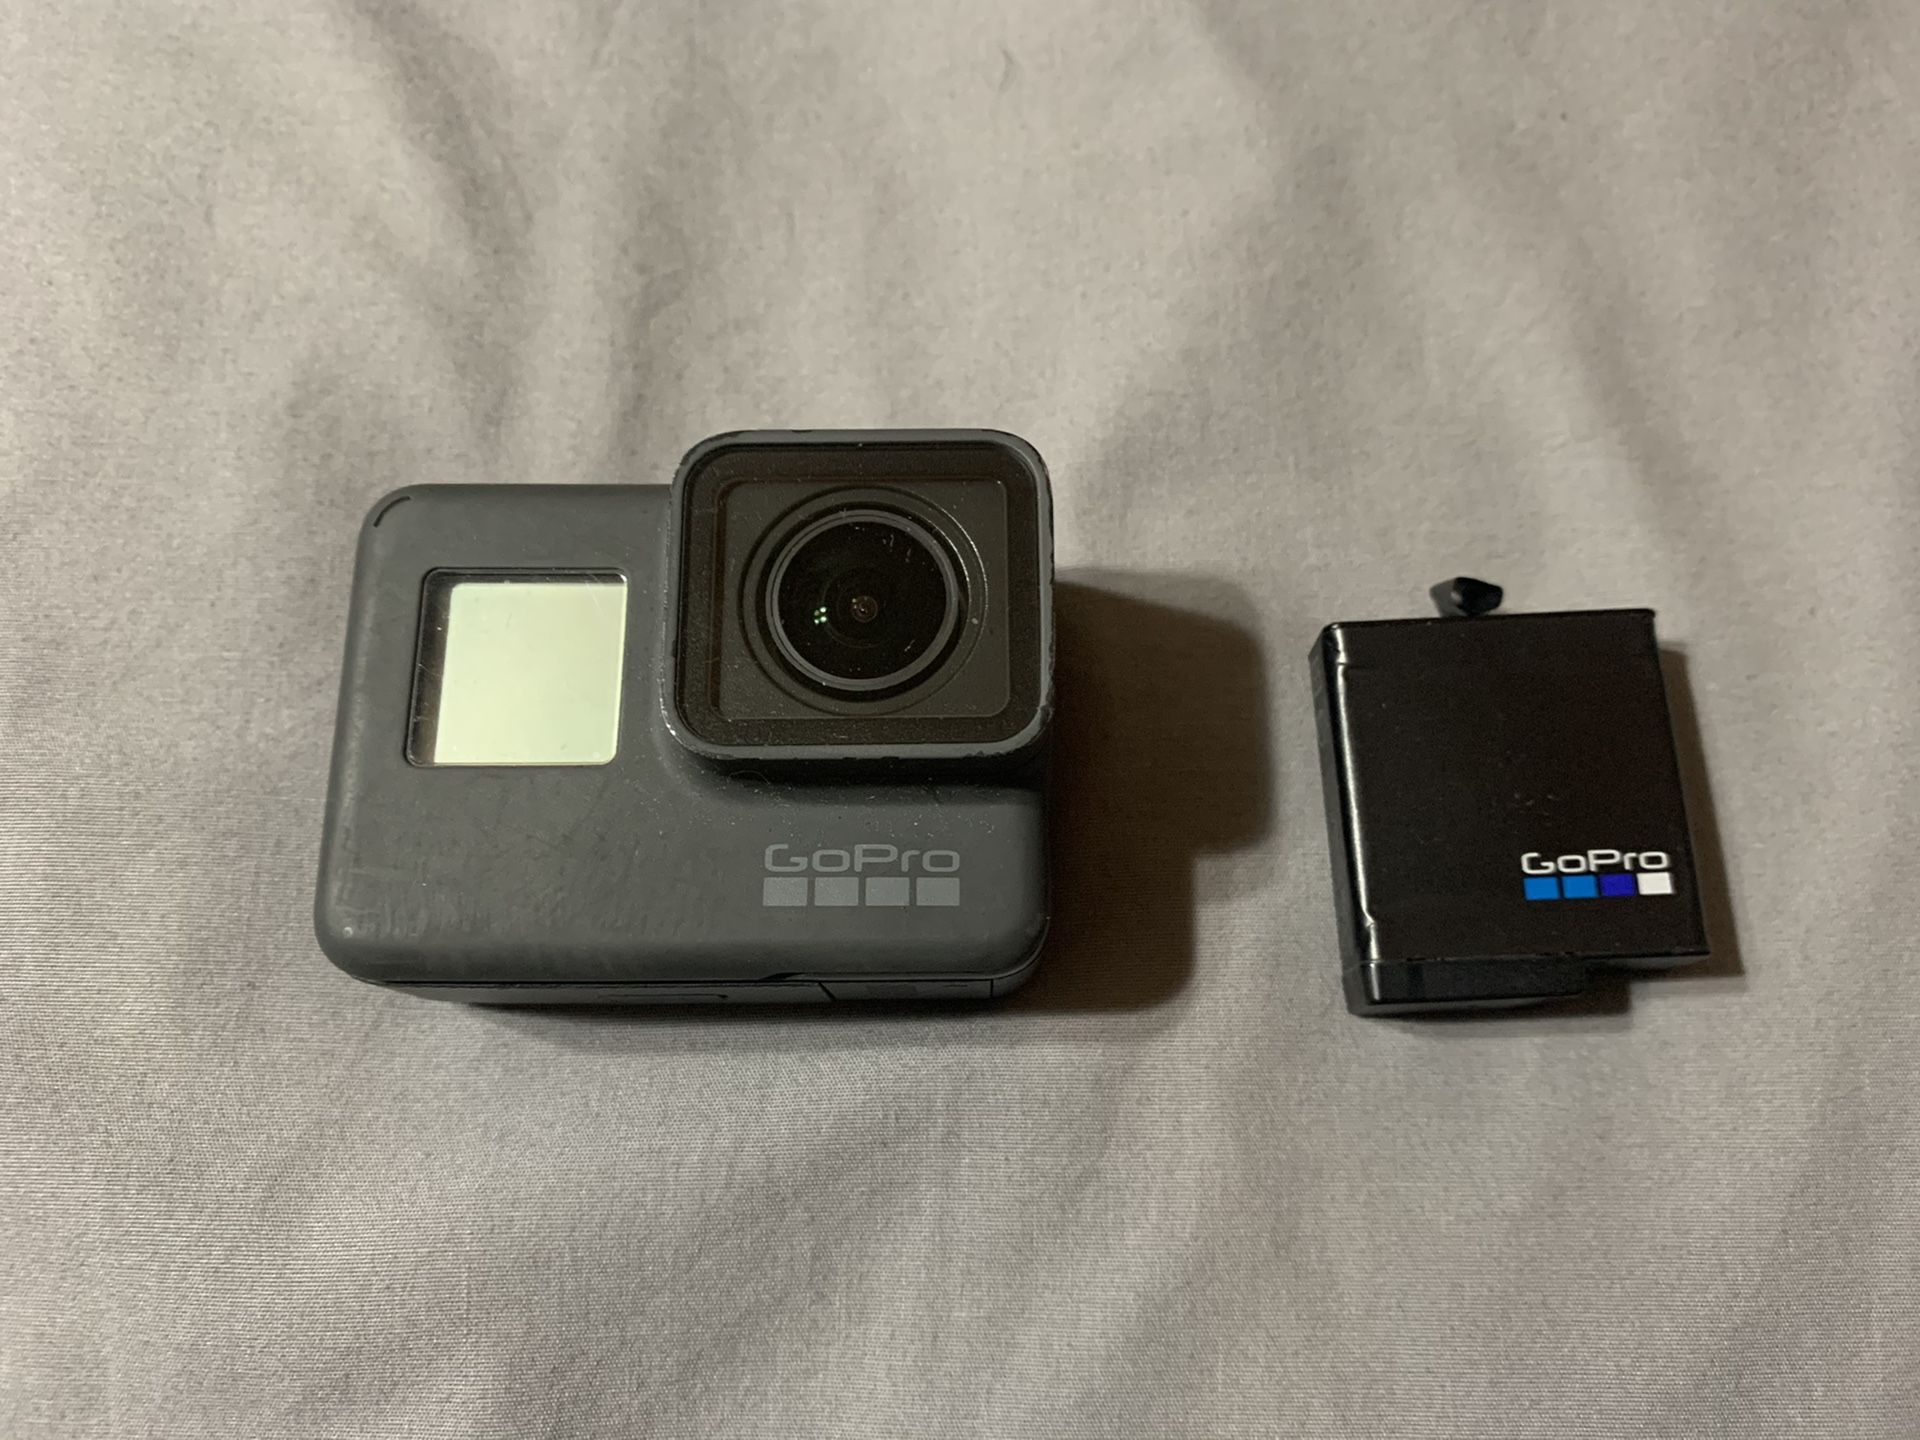 GoPro Hero 5 with extra battery